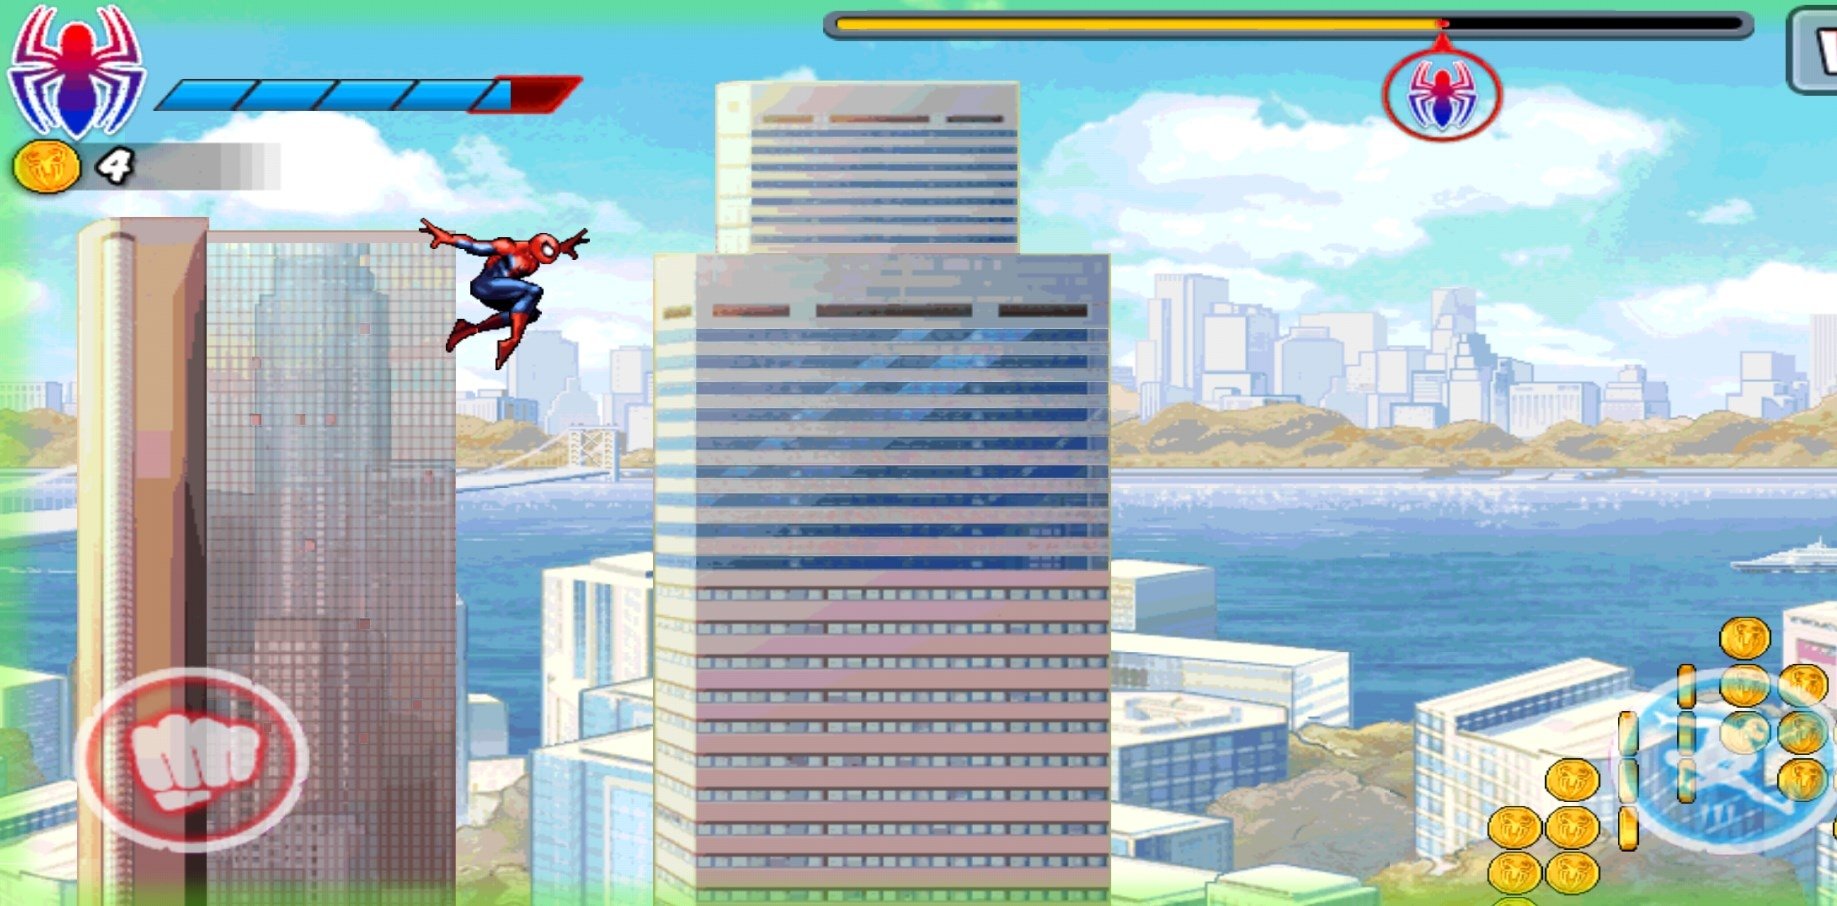 spider man ultimate power unlimited money game download